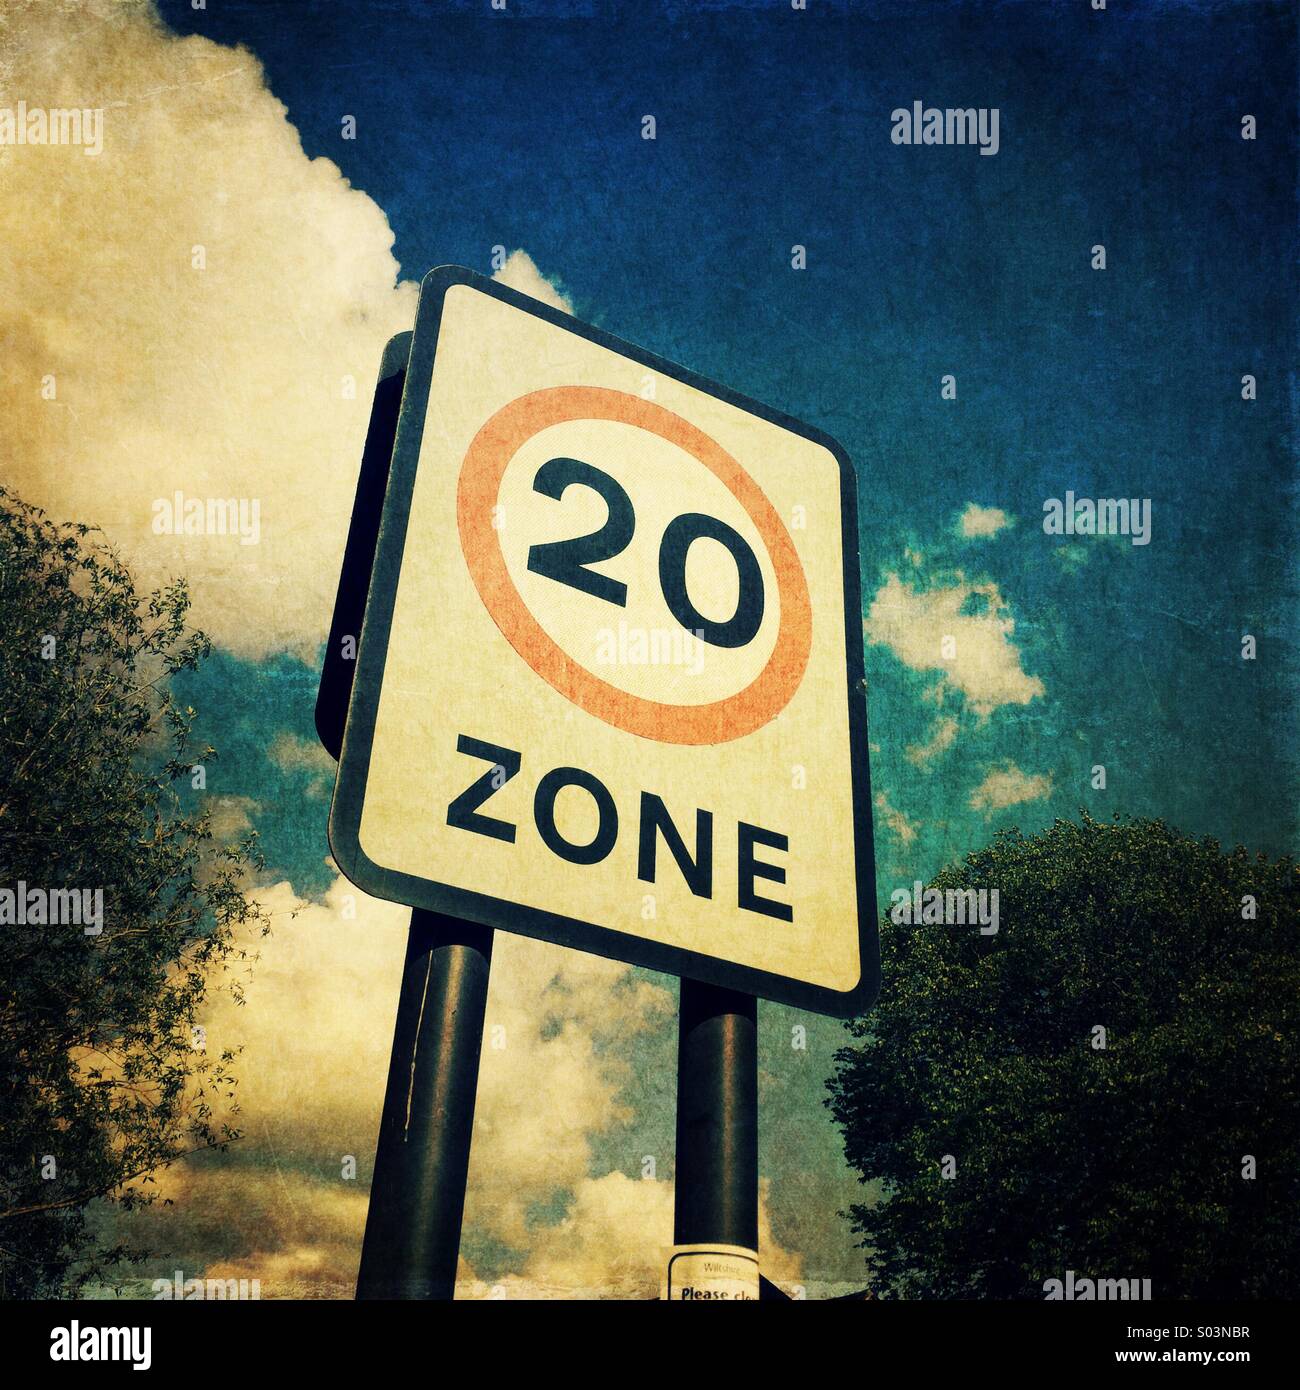 20 mph zone speed limit sign Stock Photo